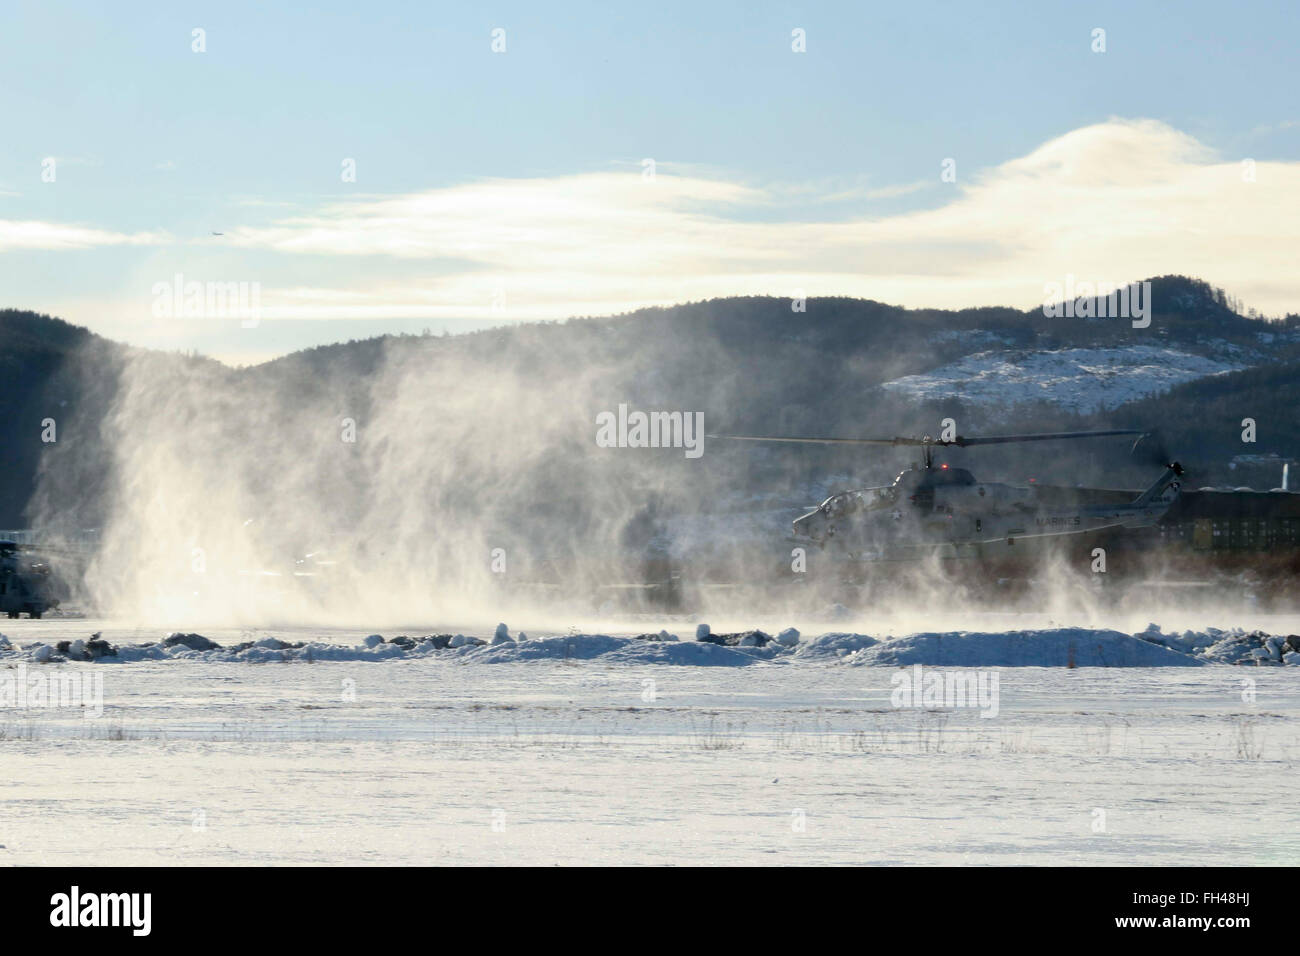 A U.S. Marine Corps AH-1W Super Cobra helicopter takes lift at Vaernes, Norway, Feb. 22, 2016, as 2nd Marine Expeditionary Brigade prepares for Exercise Cold Response 2016.  All aircraft with Marine Heavy Helicopter Squadron (-) Reinforced, the Air Combat Element of 2d MEB, were dismantled at Marine Corps Air Station Cherry Point, N.C., and flown to Norway in U.S. Air Force C-5 Galaxies to provide air support during the exercise. Cold Response 16 is a combined, joint exercise comprised of 12 NATO allies and partnered nations and approximately 16,000 troops. Stock Photo